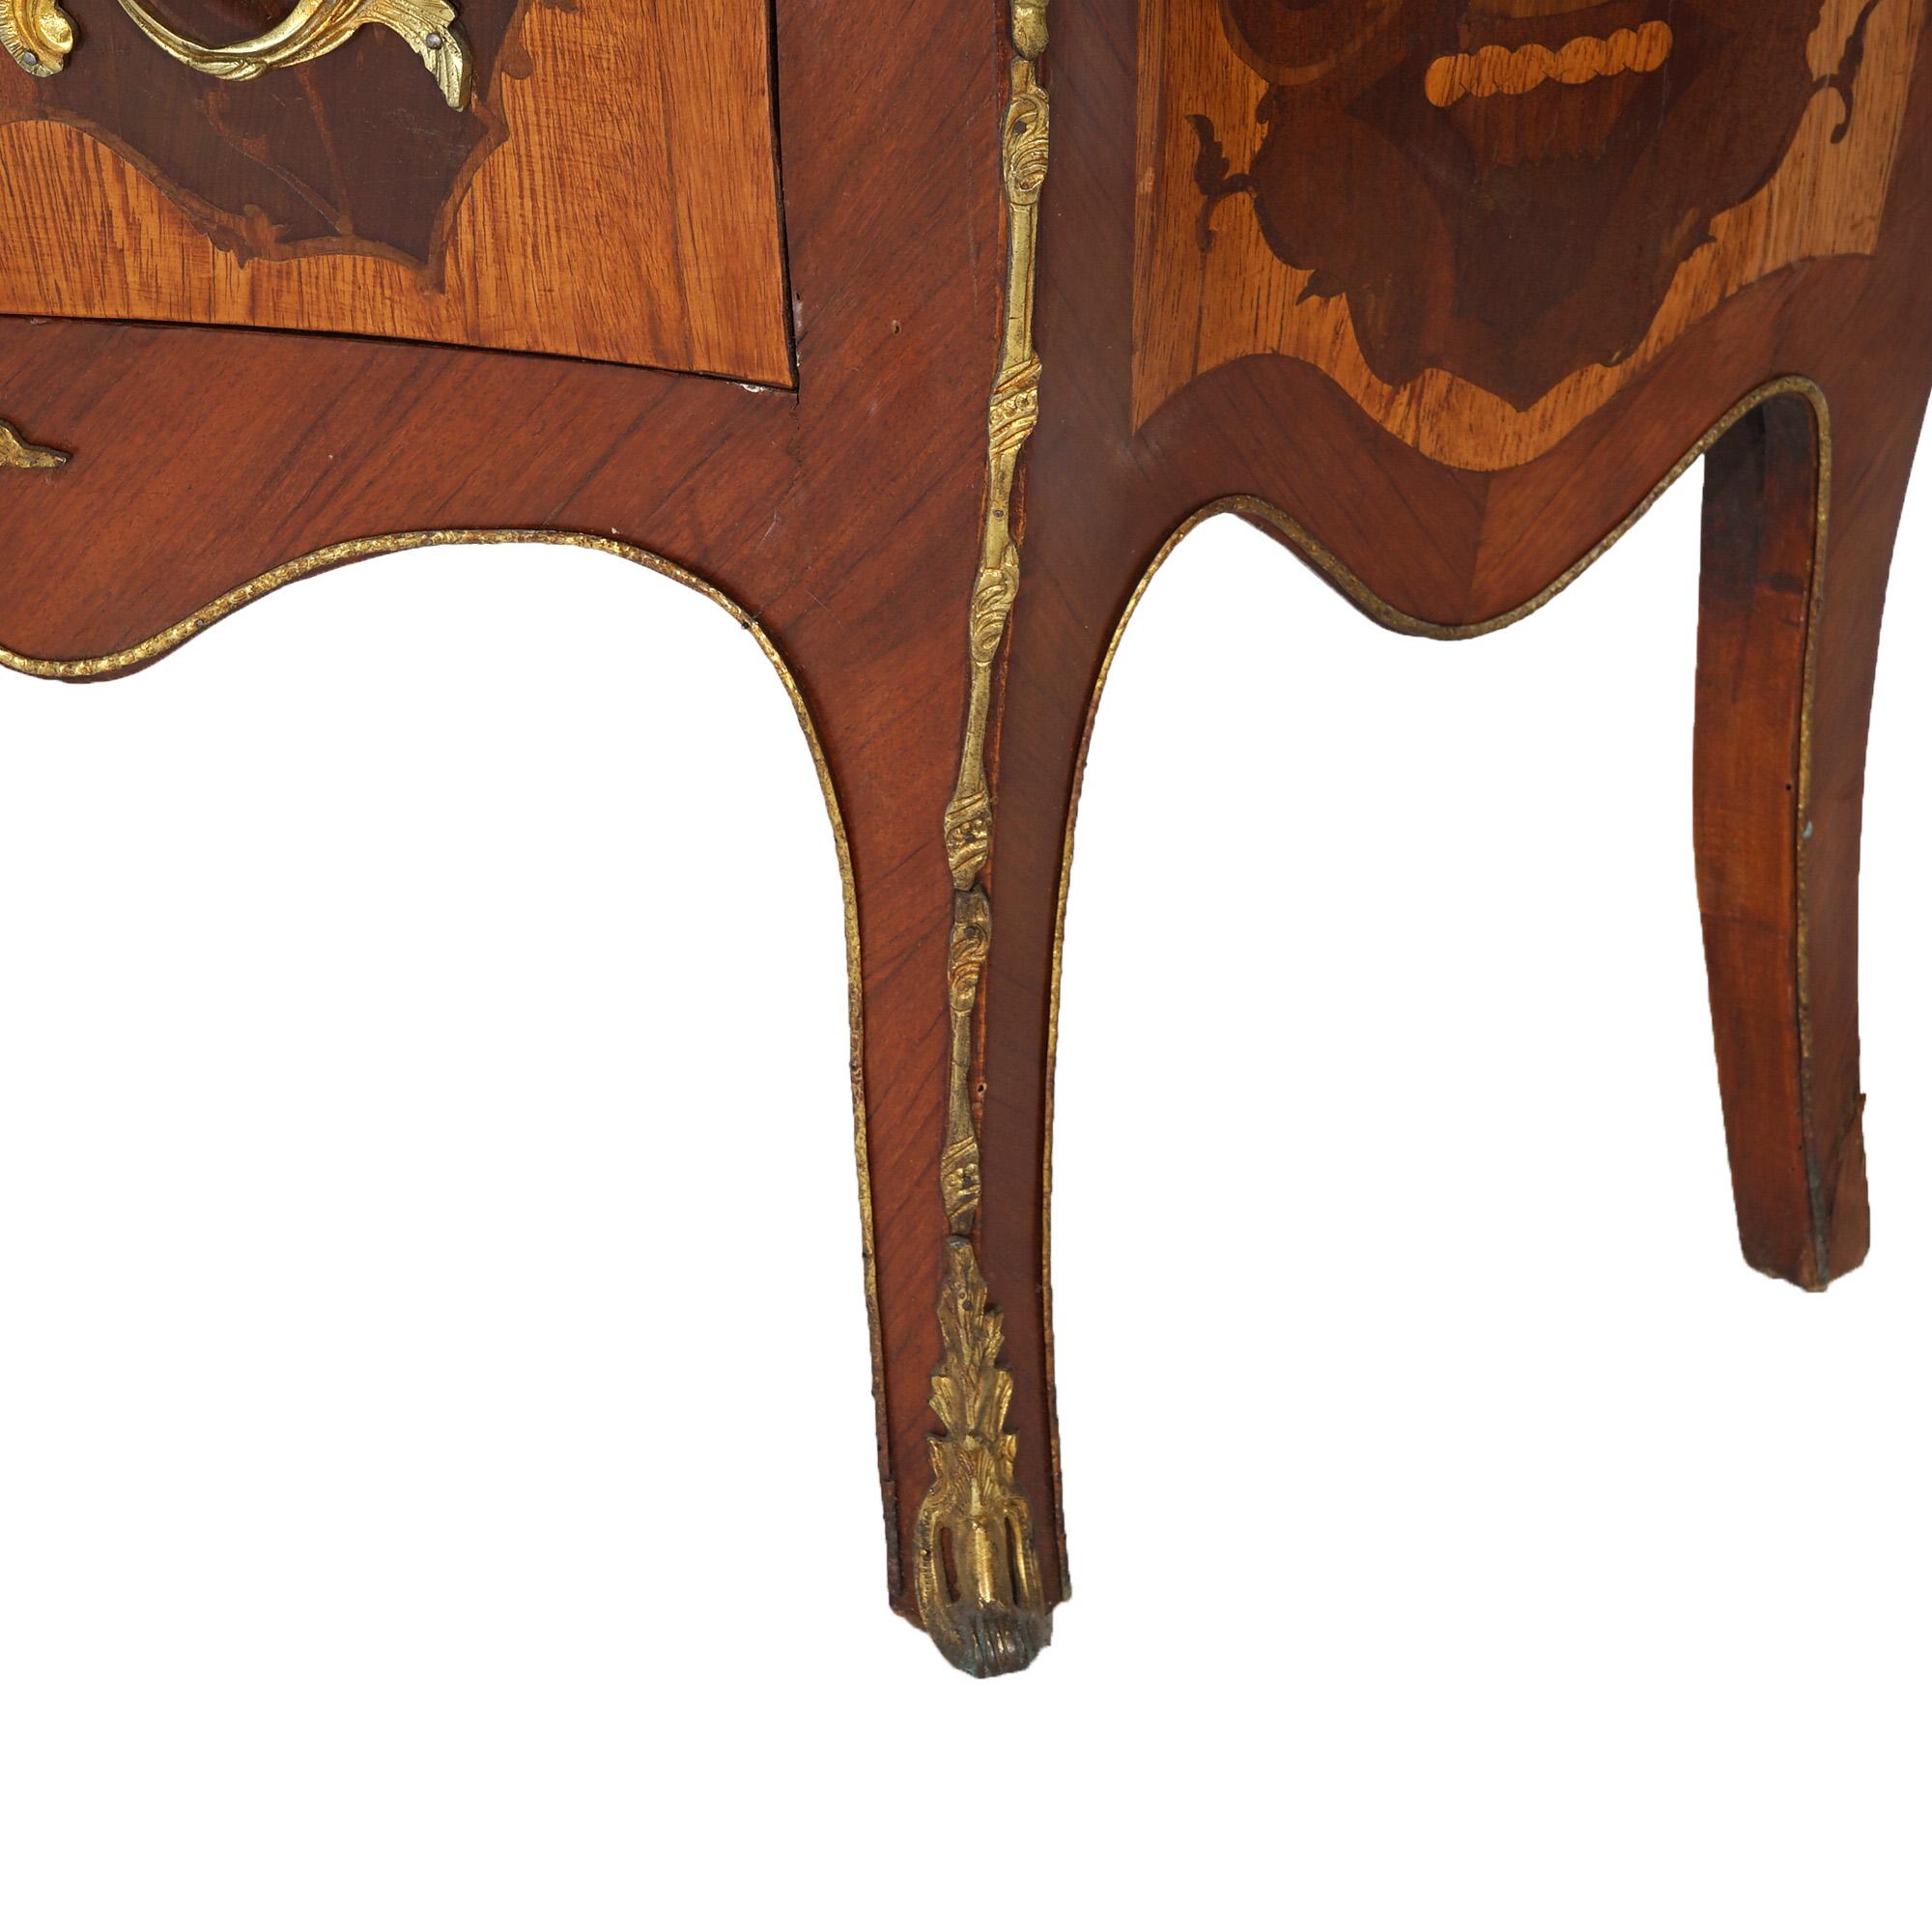 Antique Louis XV Style Marble, Ormolu, Satinwood & Kingwood Inlaid Commode 20thC For Sale 10